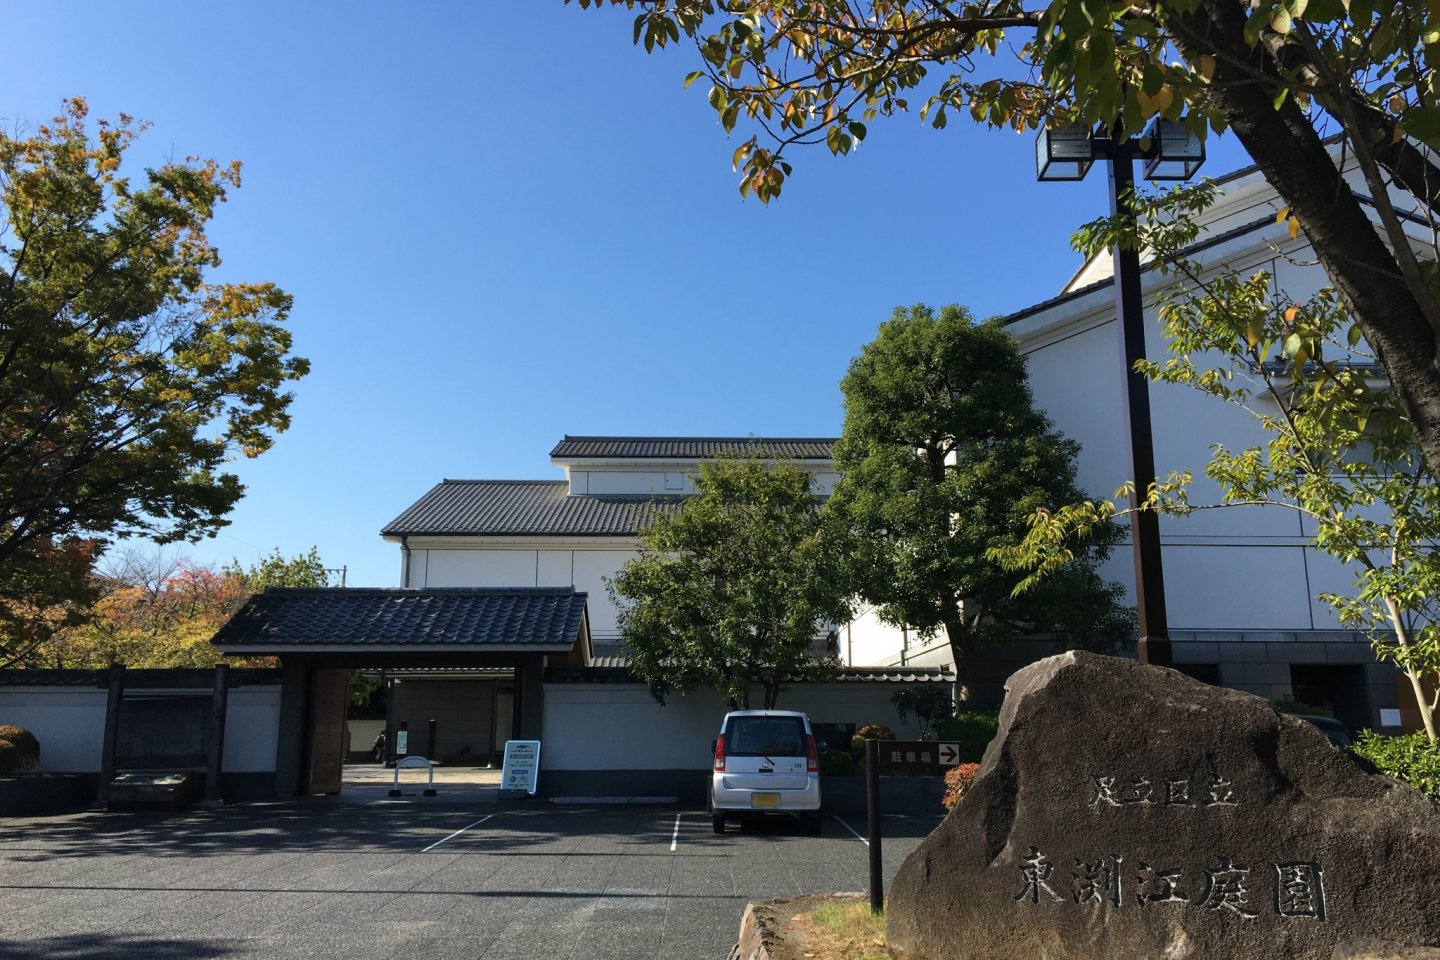 The Adachi Historical Museum